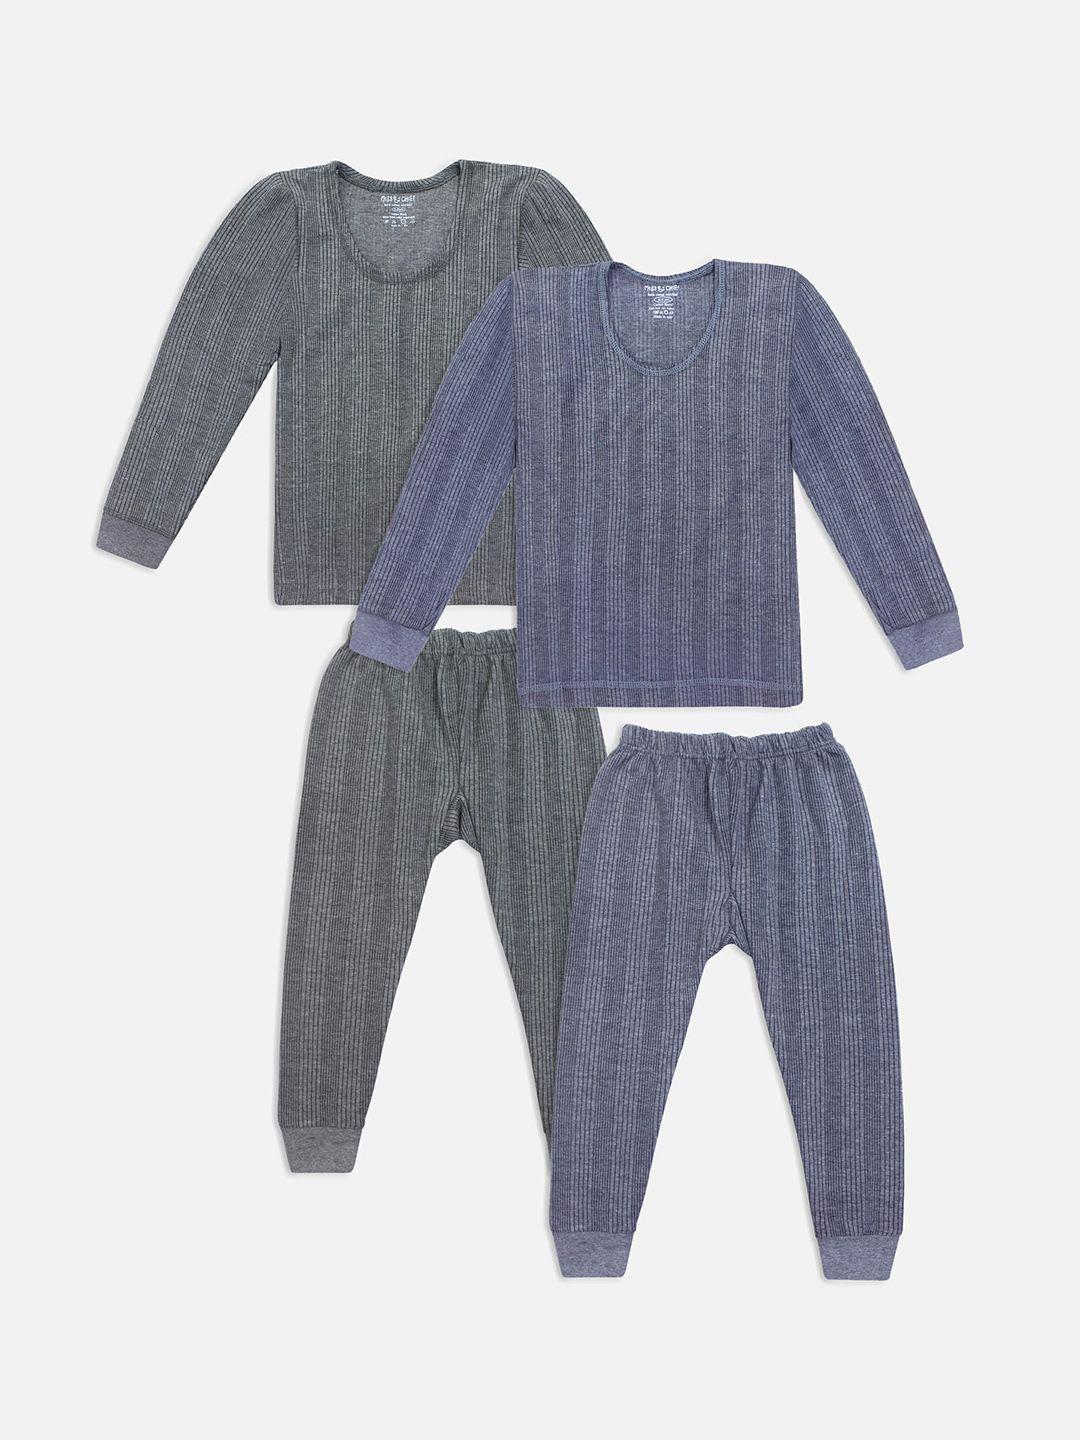 miss & chief kids pack of 2 striped cotton thermal set